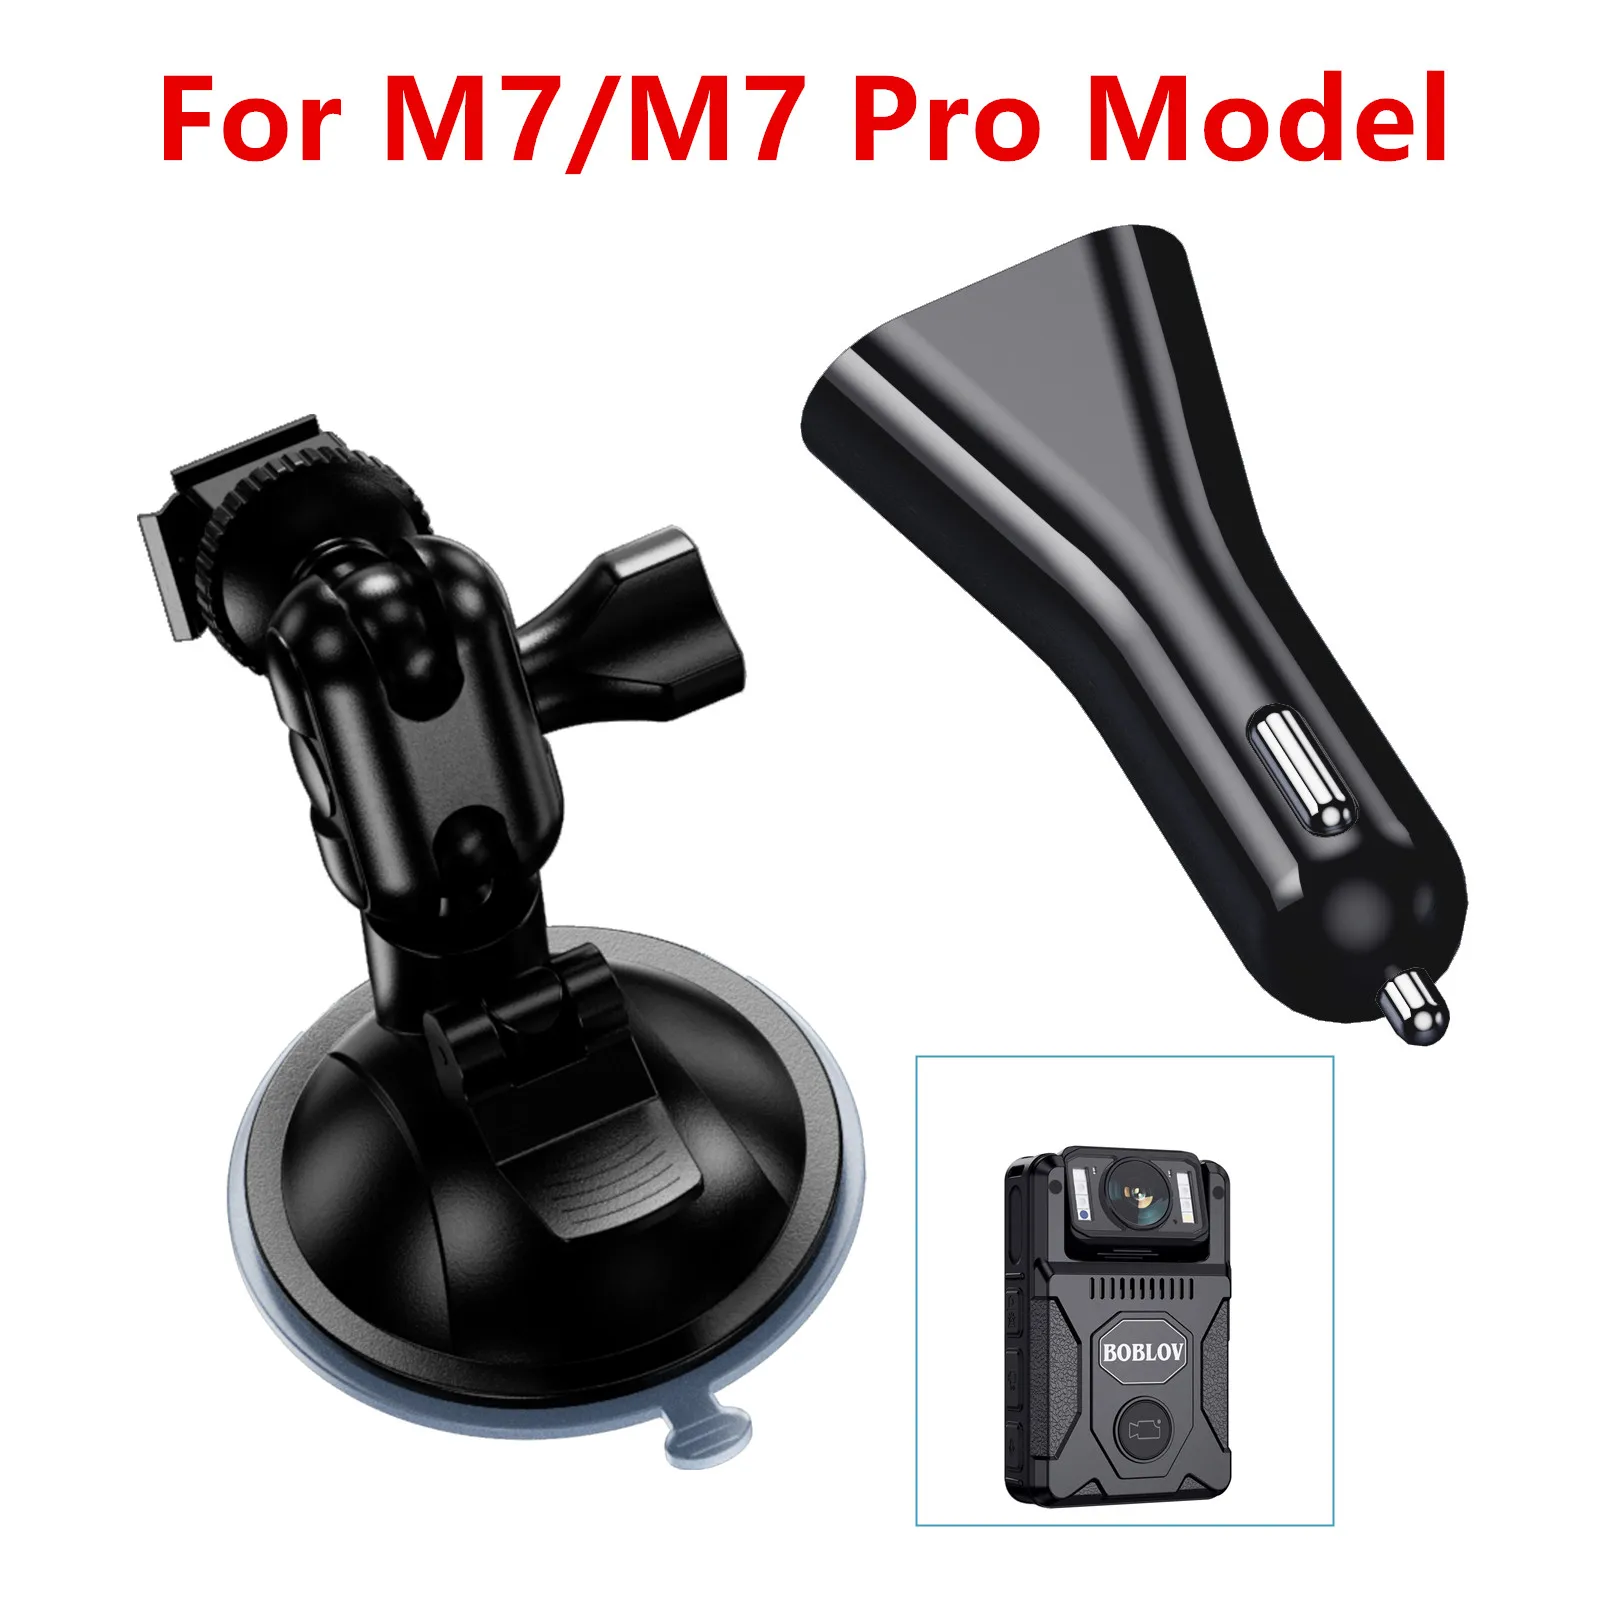 

BOBLOV Car Suction Cup forM7/M7 Pro Body Camera Car Mount and a Car Charger ONLY for M7/M7 Pro Body Camera